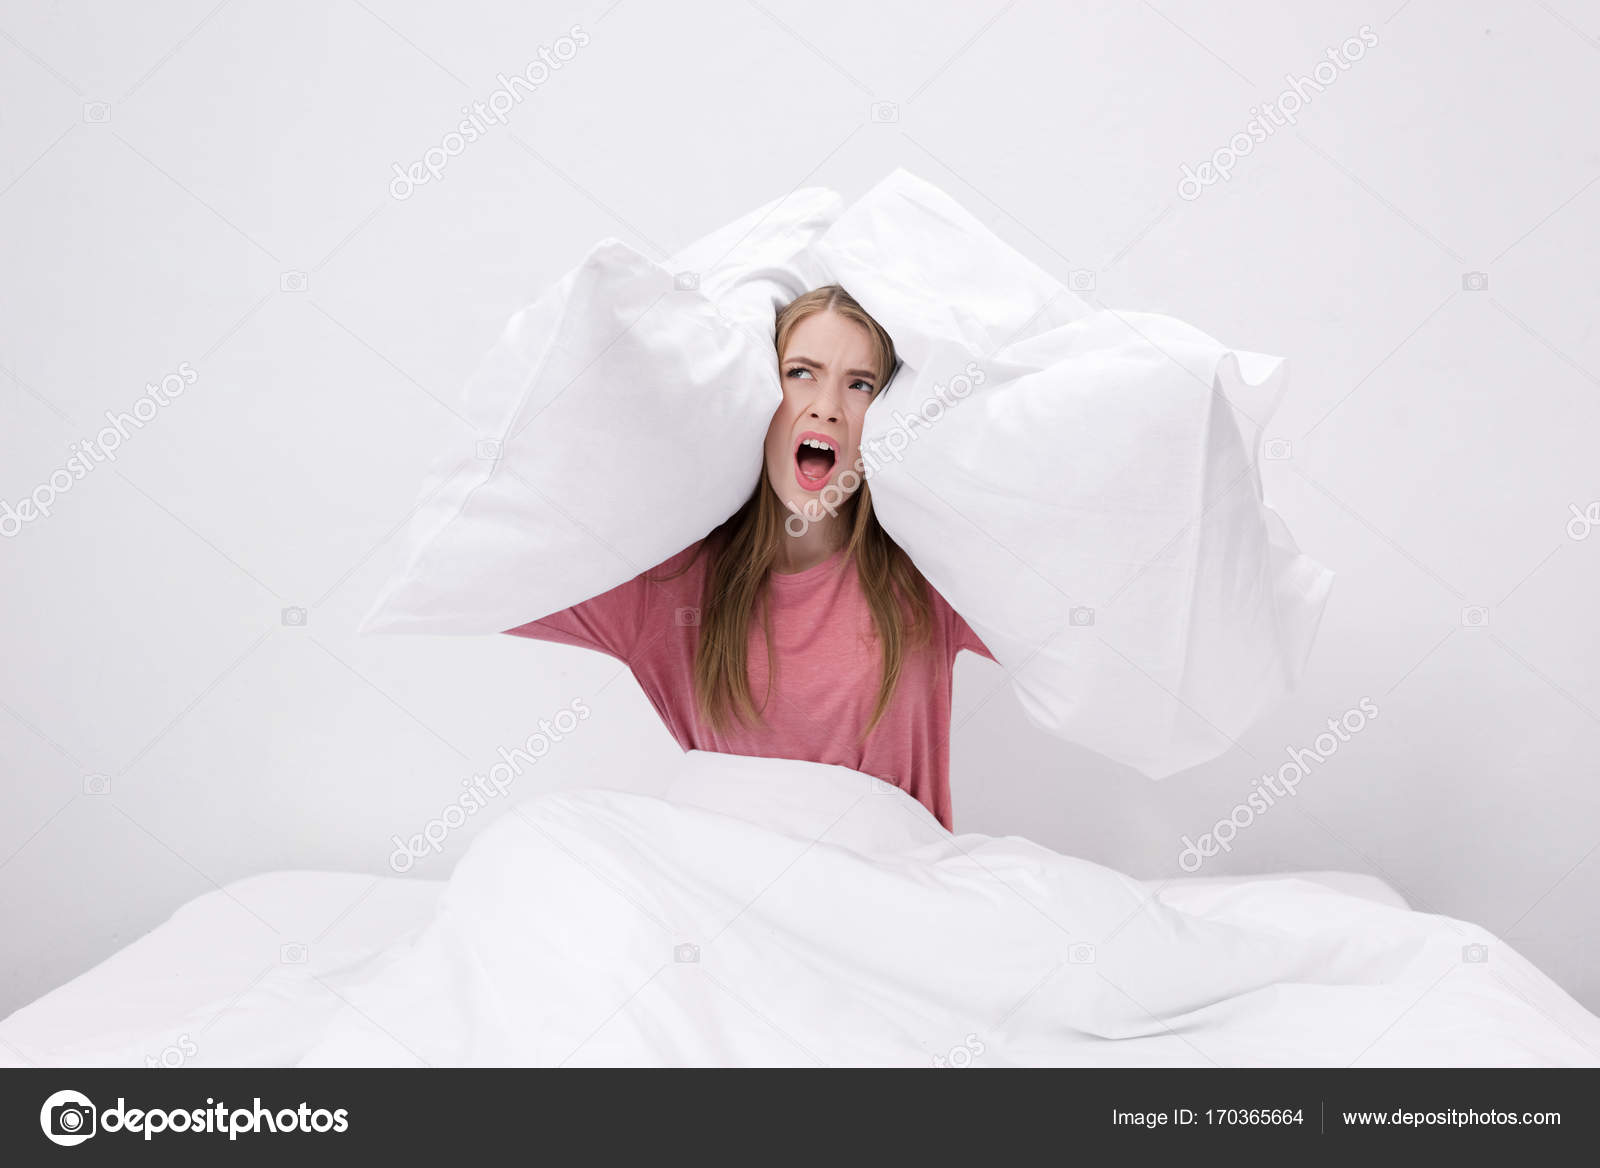 Angry woman with insomnia — Stock Photo © AndrewLozovyi #170365664